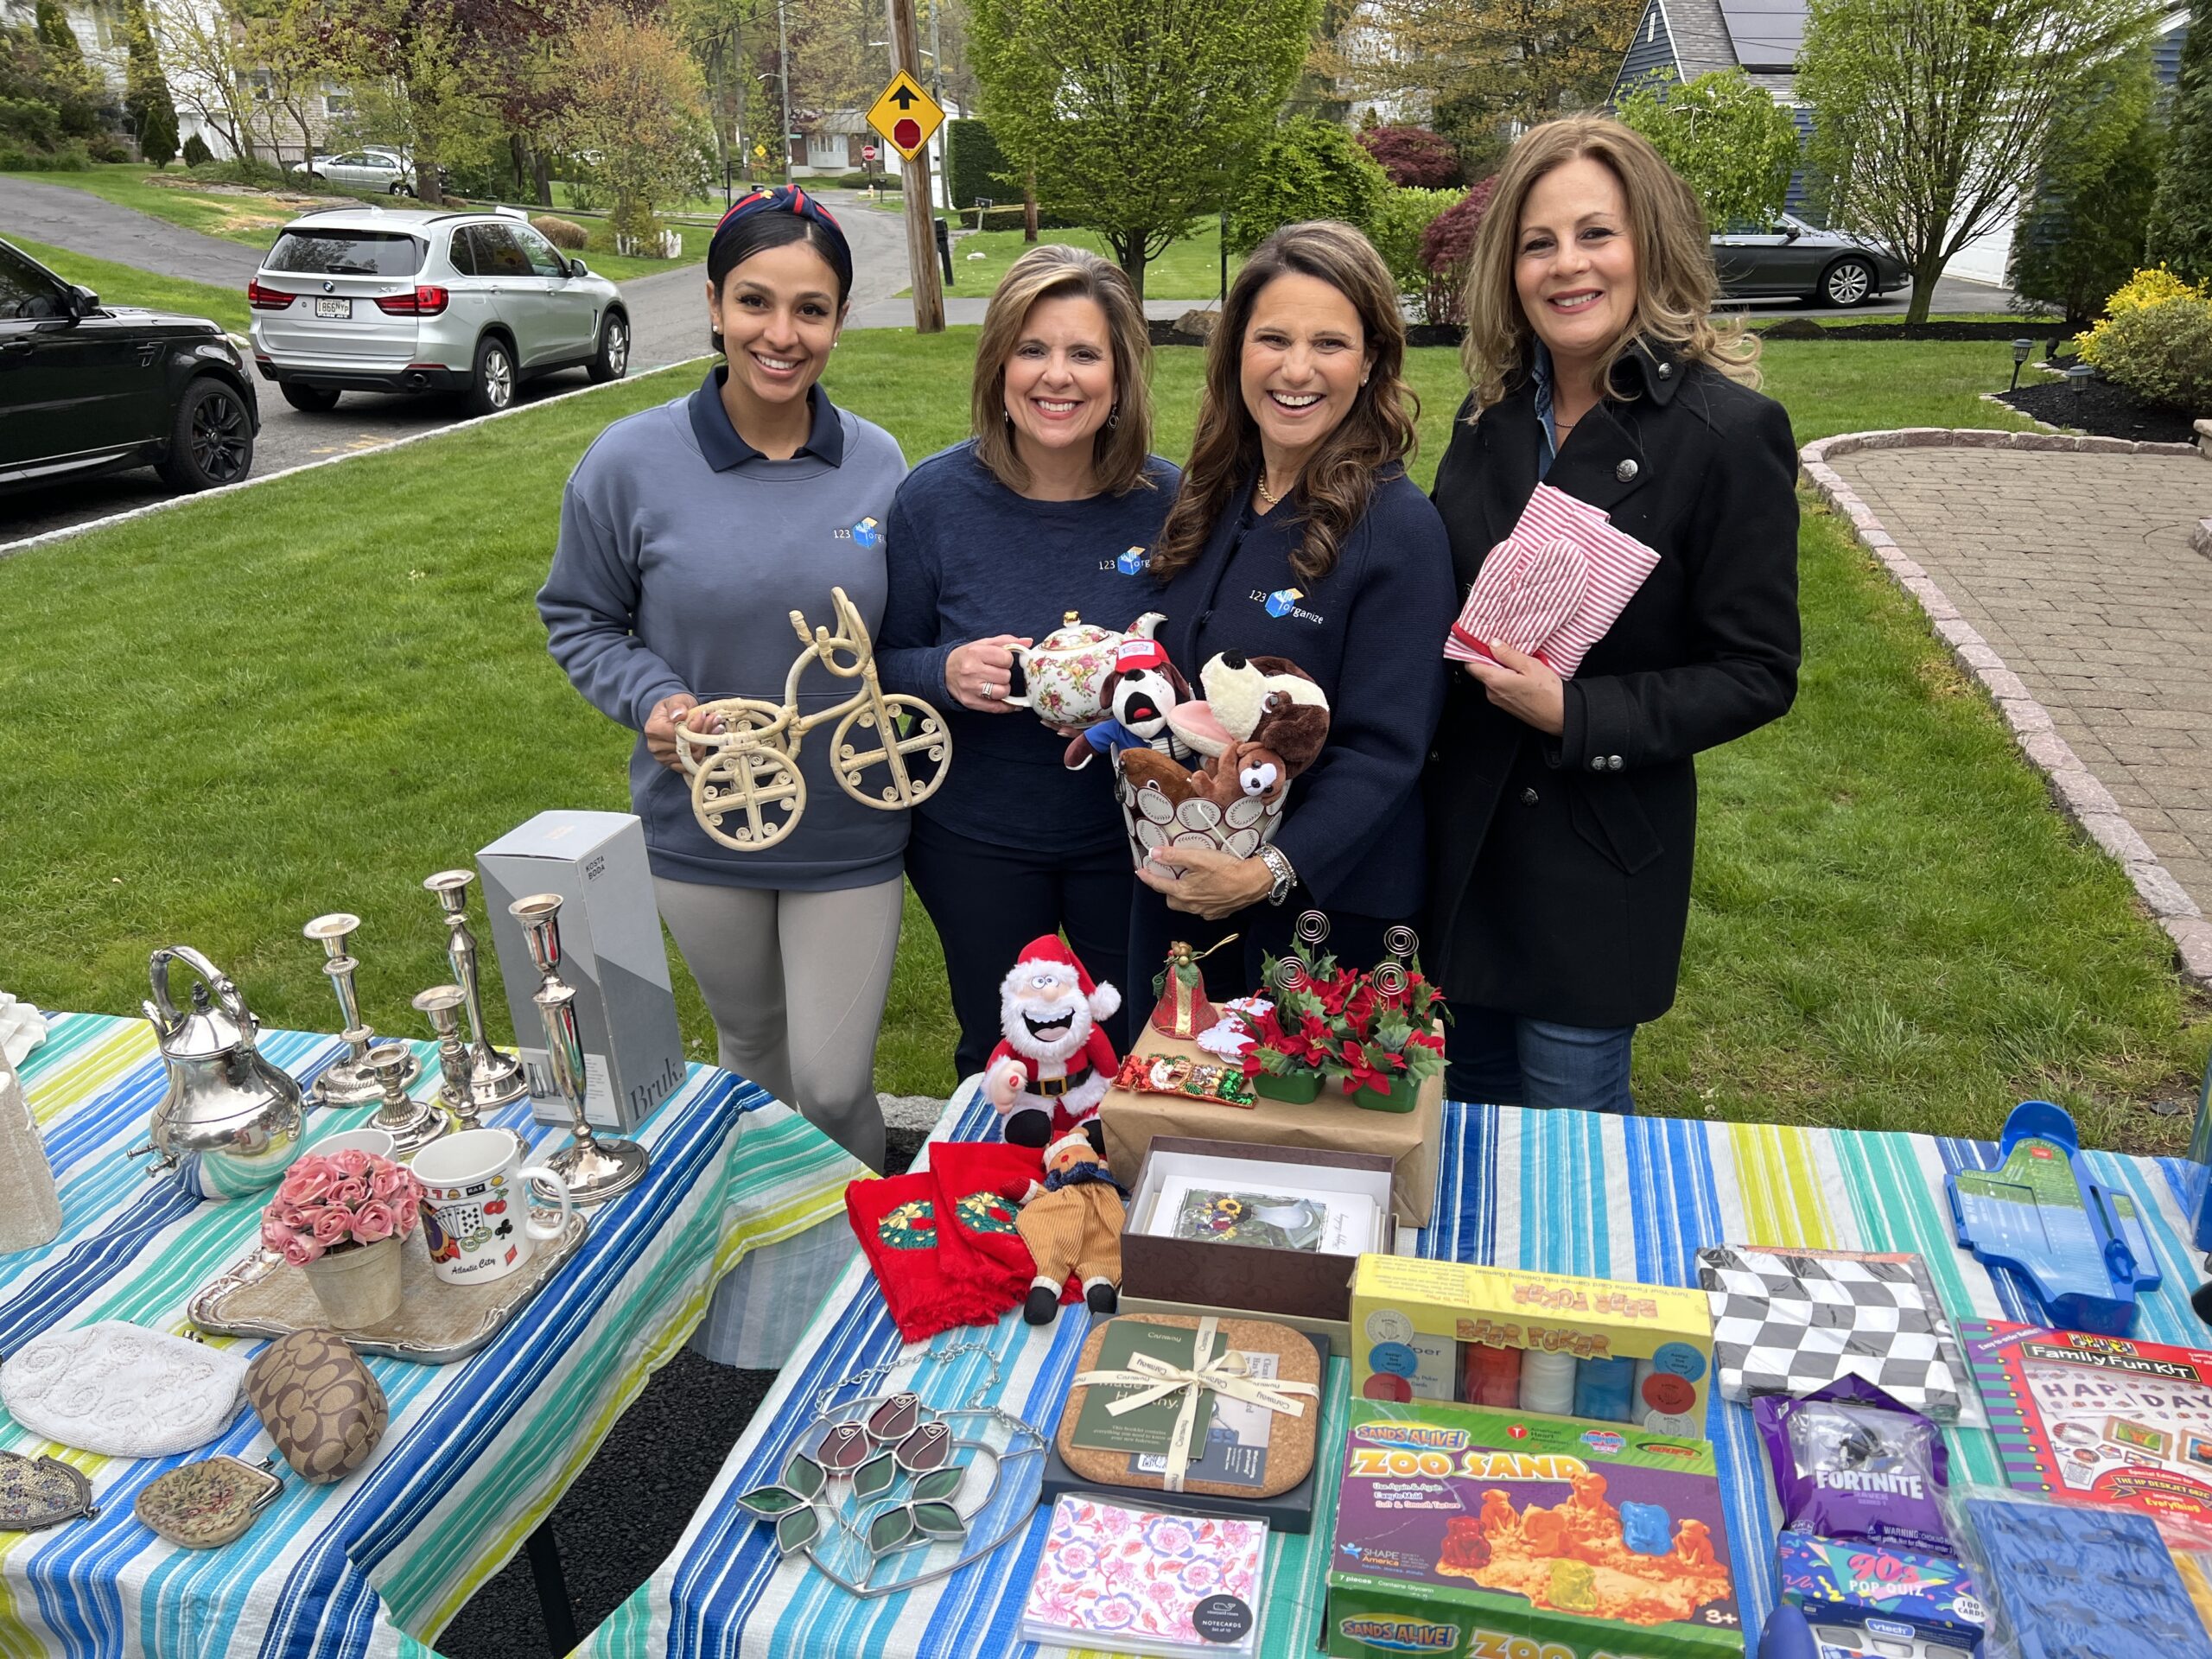 News 12 Garage Sale with Janice Lieberman on The Real Deal